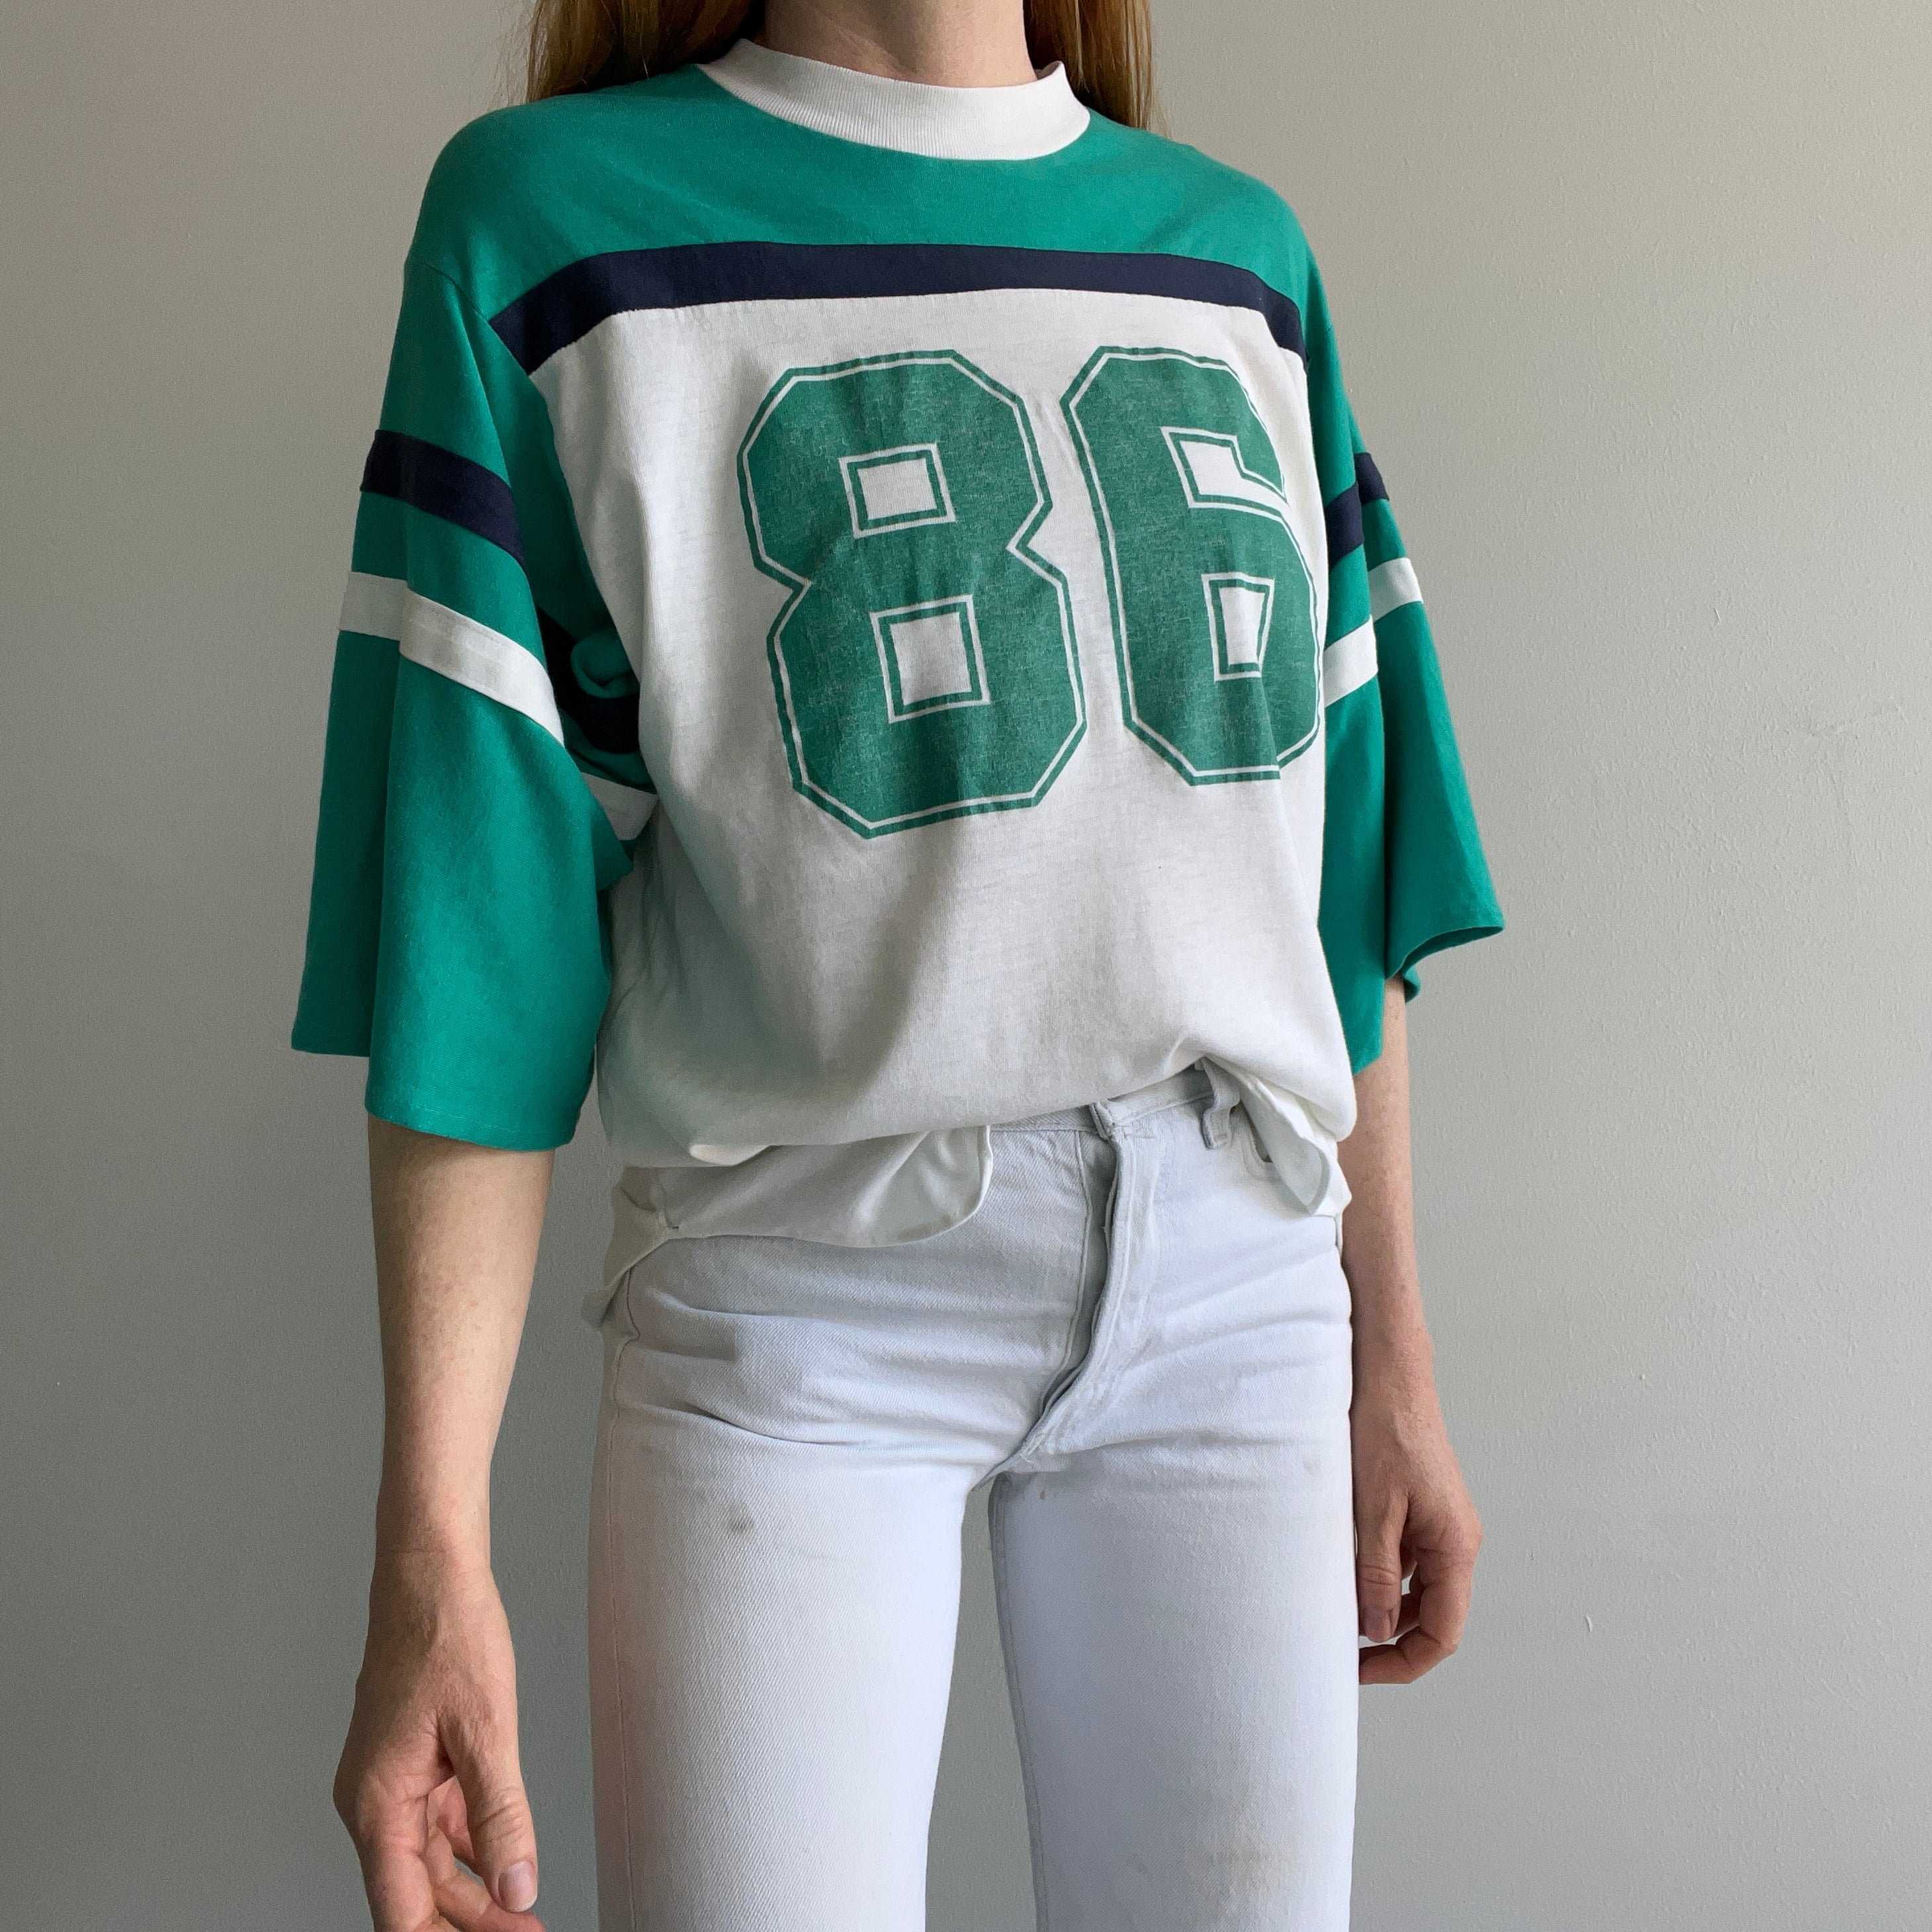 1986 Very Slouchy and Thin Football T-Shirt with XL Sleeves